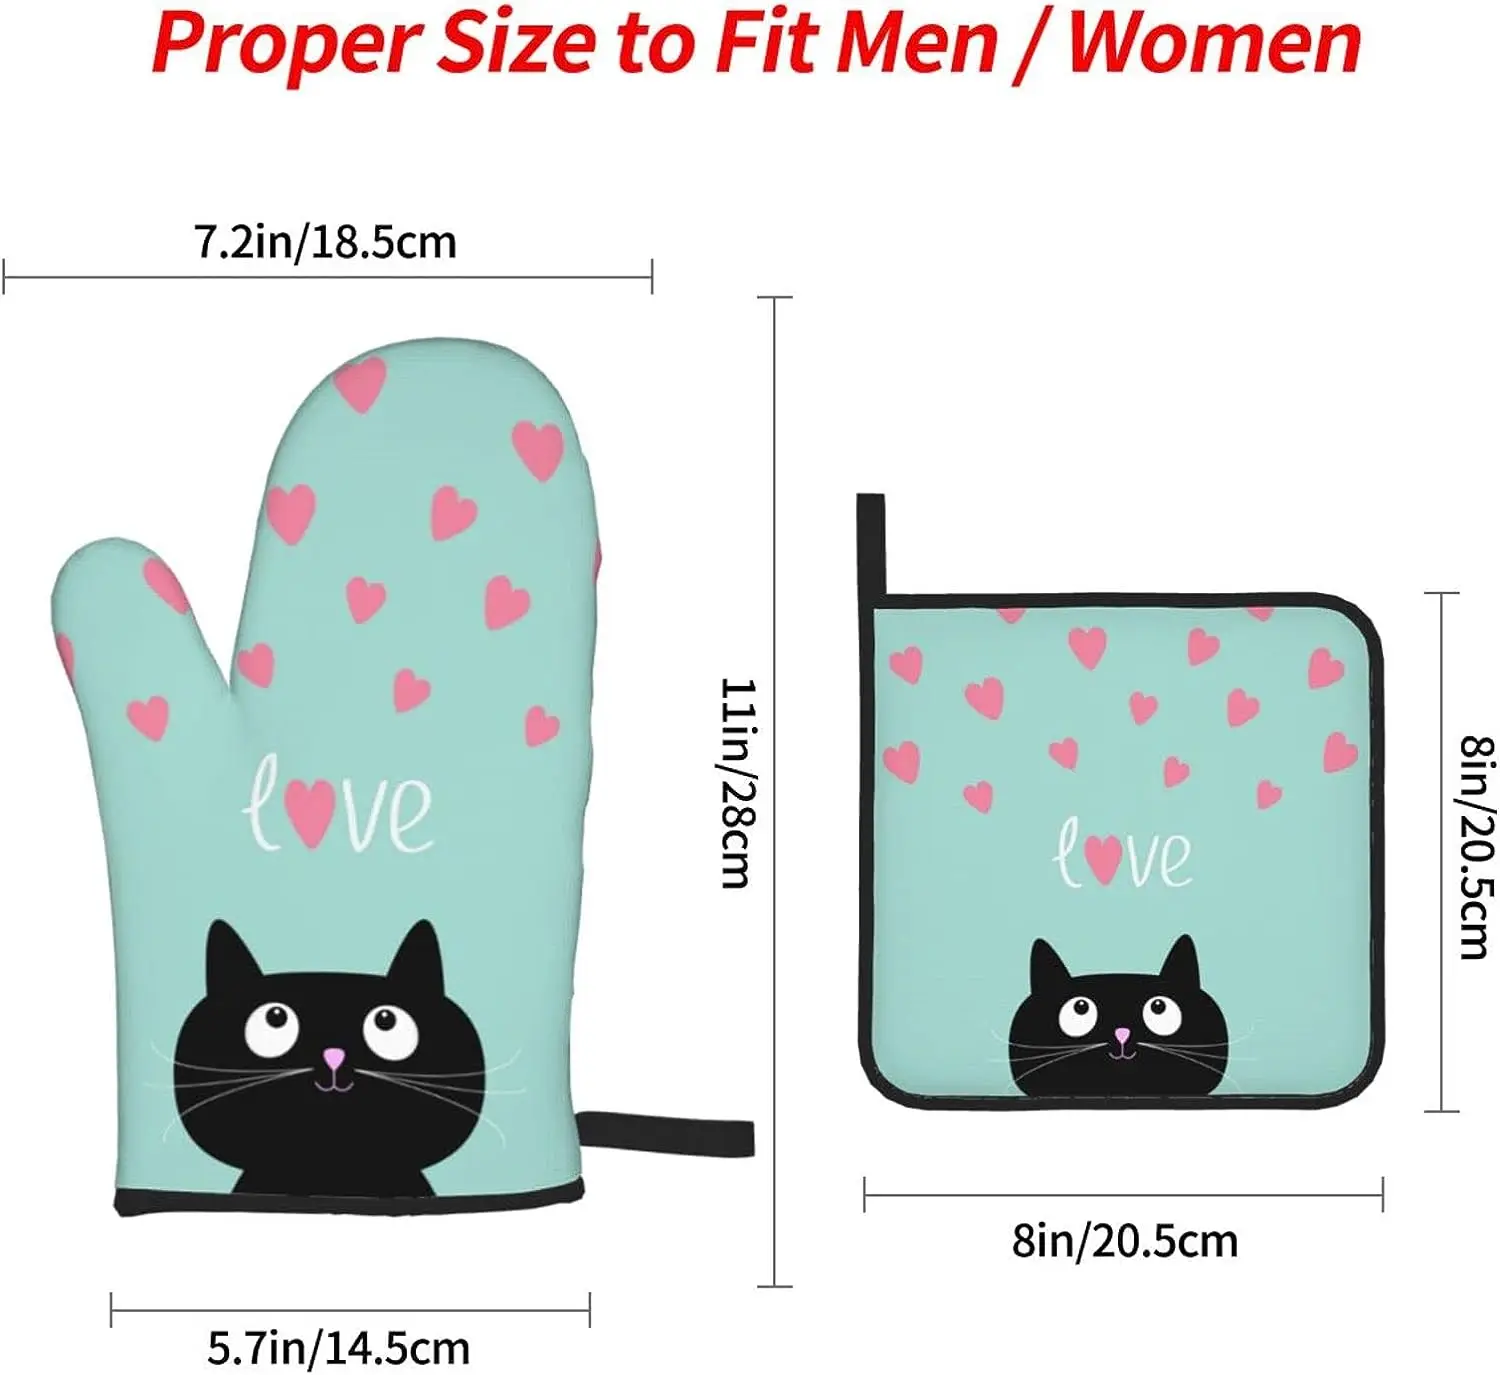 https://ae01.alicdn.com/kf/S83632d80faff49f6b7d9816565c71c16g/Cute-Black-Cat-Love-Oven-Mitts-and-Pot-Holders-4pcs-Sets-Funny-Kitchen-High-Heat-Resistant.jpg